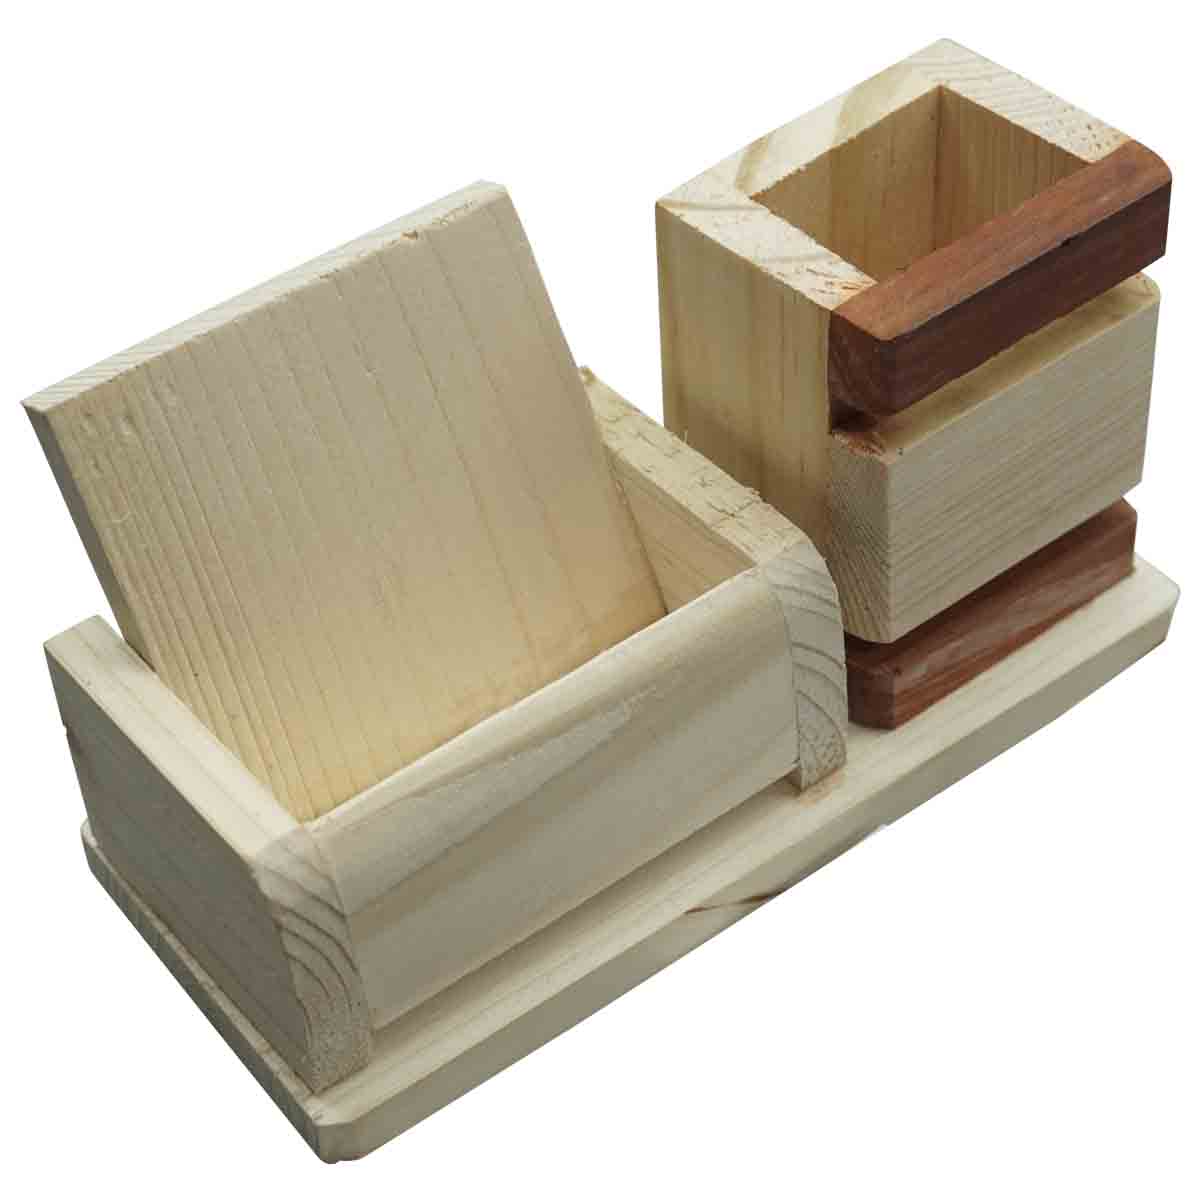 penhouse.in Pen and Visiting Card Wooden Holder with customization SKU - 87128